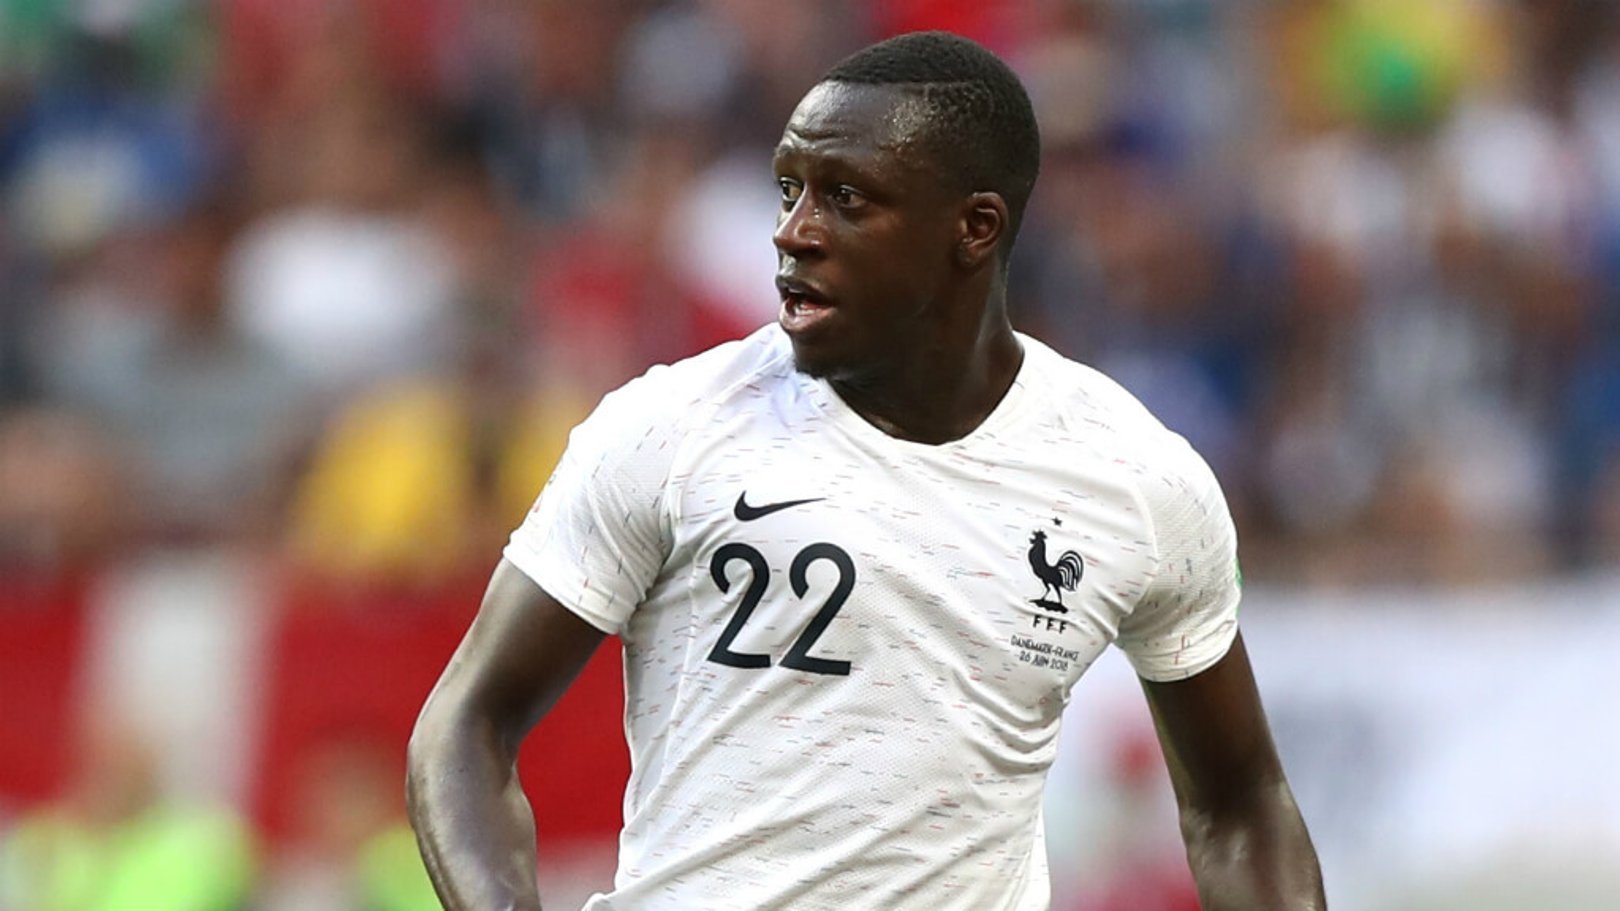 Mendy claims match-winning assist for France